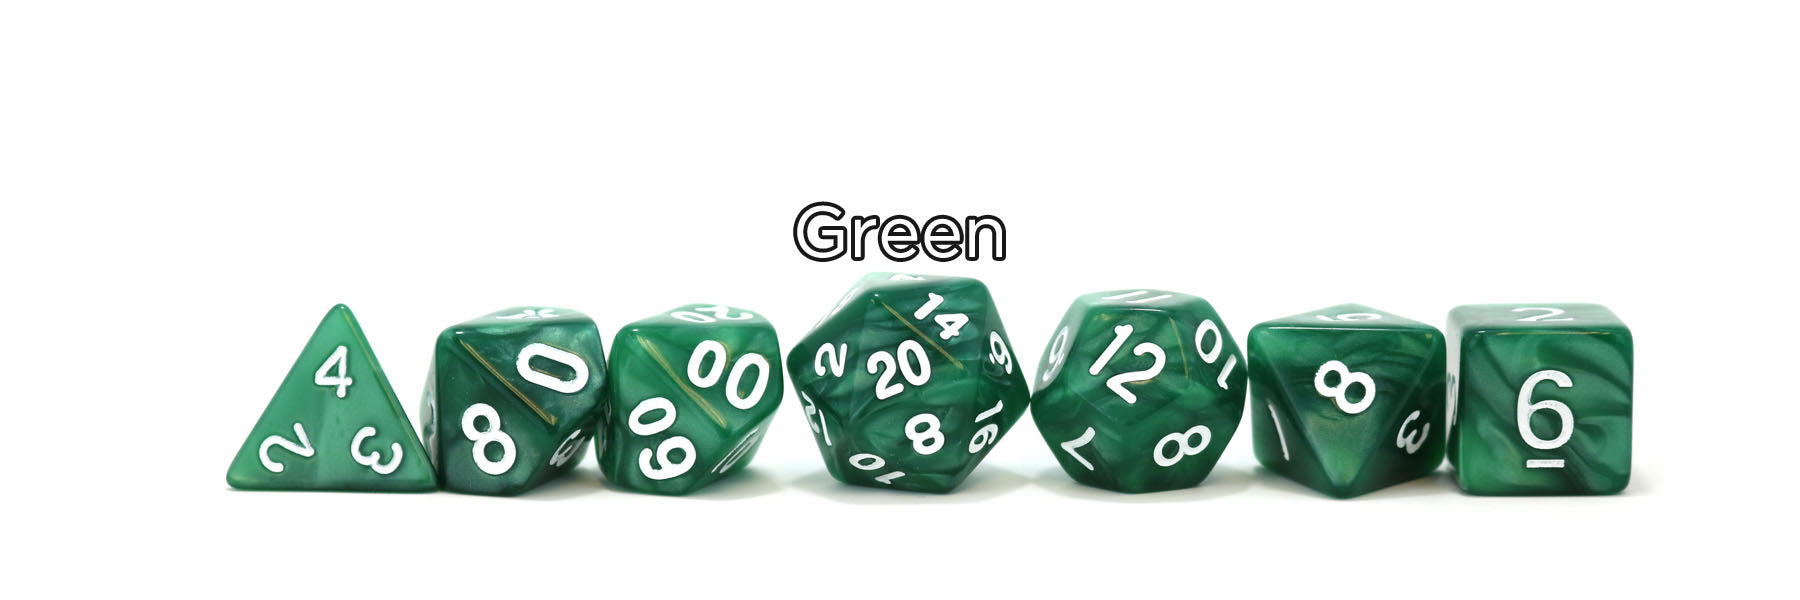 Green Dice and Accessories